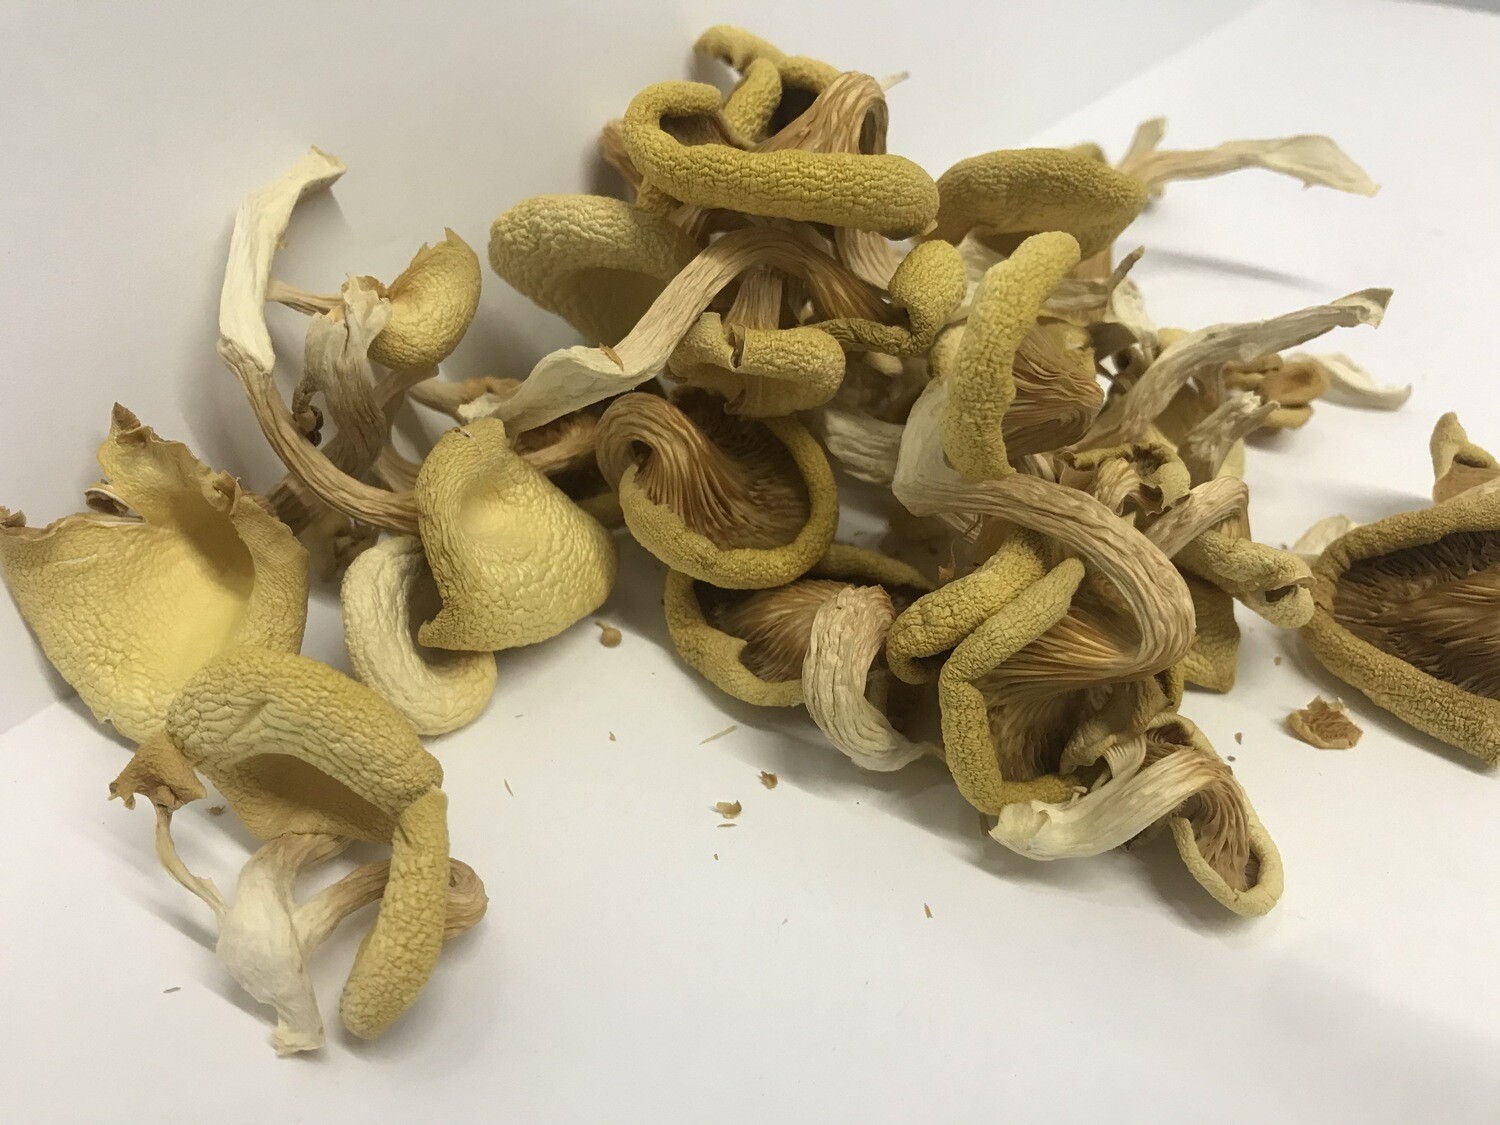 Gold Oyster Mushrooms ~1.5 oz (dried)